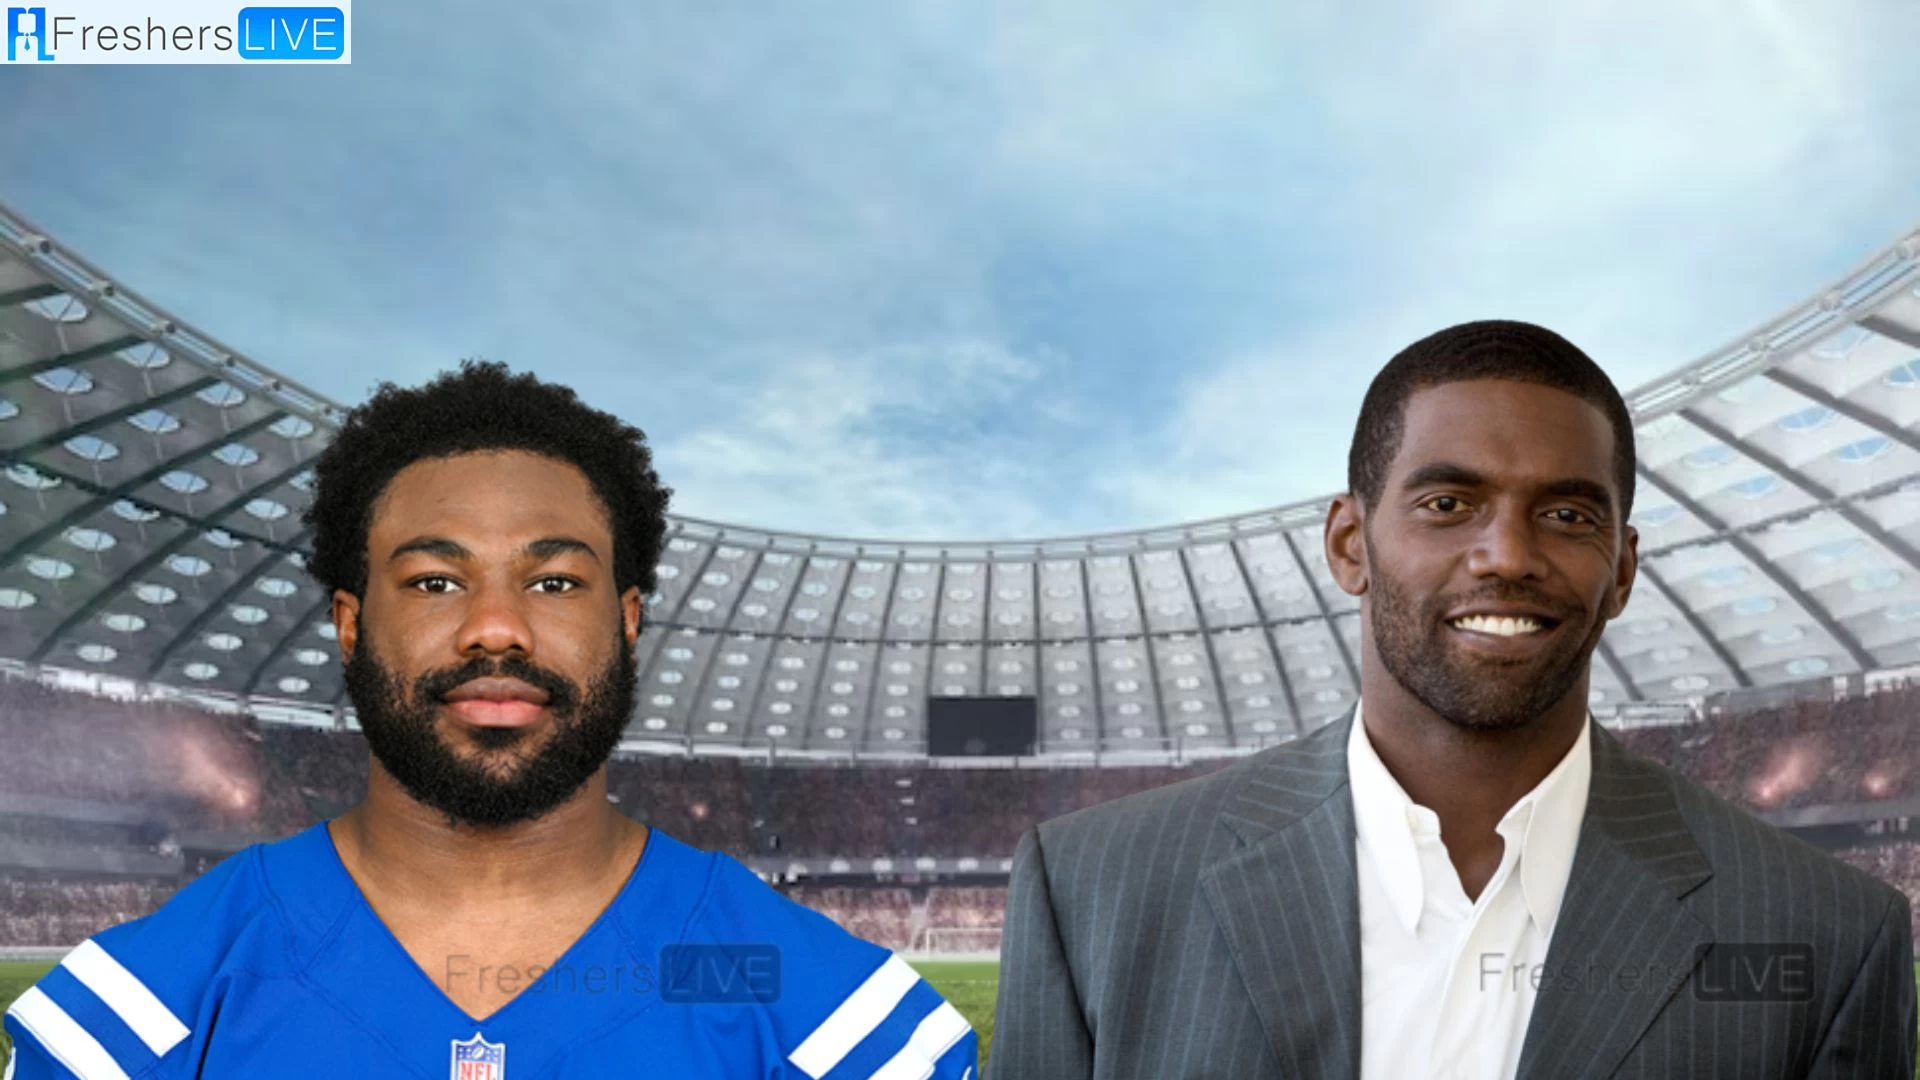 Is Zack Moss Related to Randy Moss? Who are Zack Moss and Randy Moss?